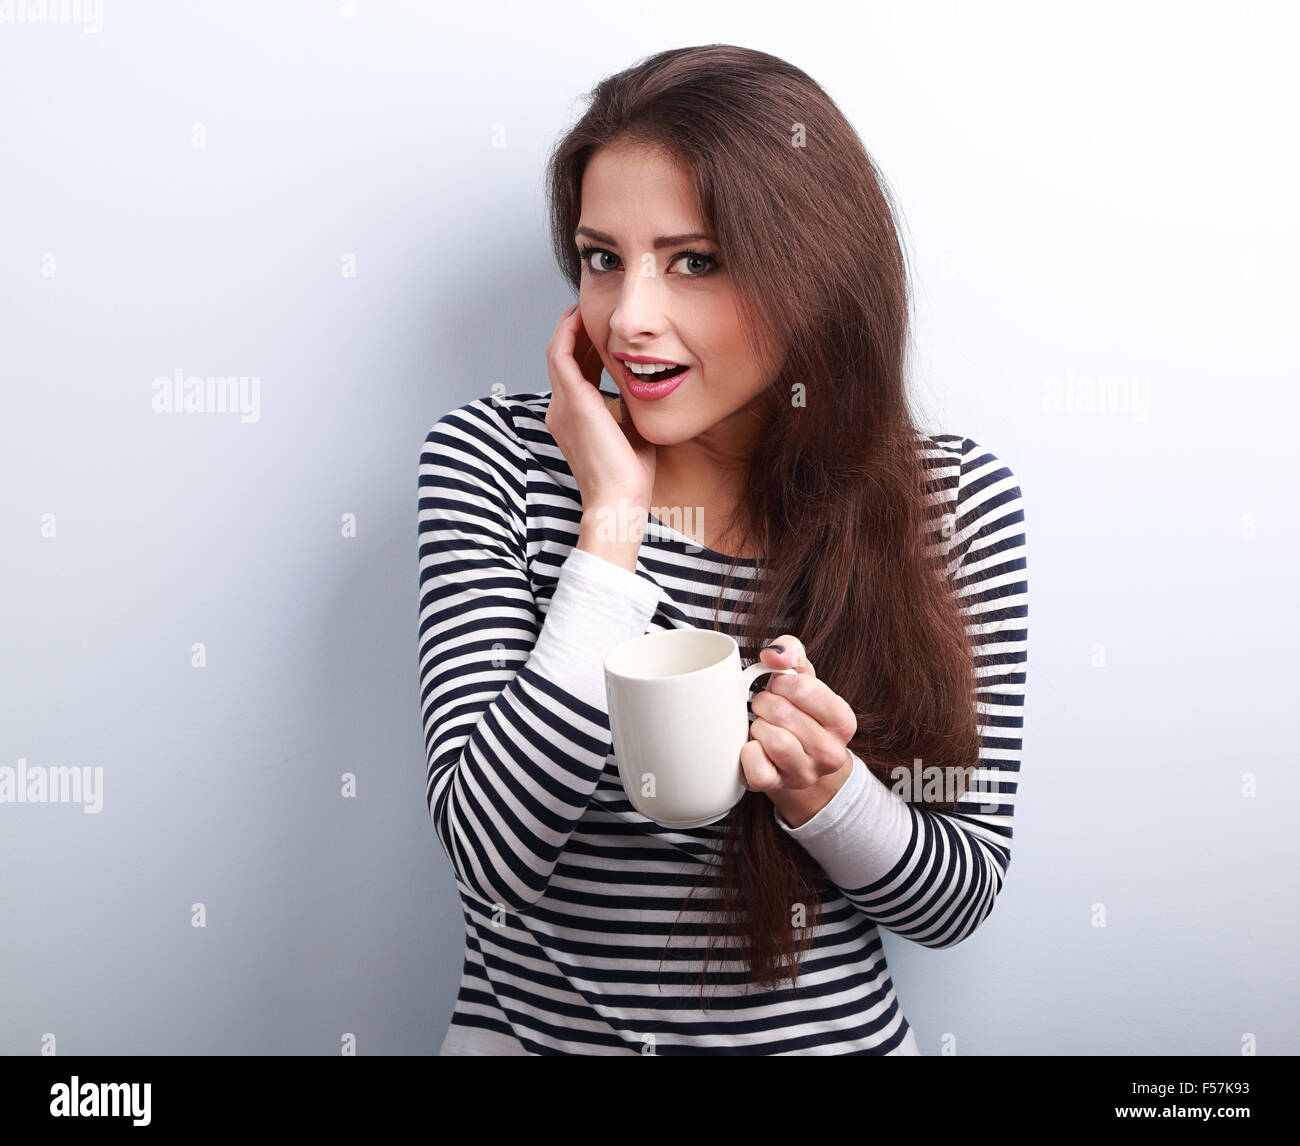 Fun surprising young woman with opened mouth holding cup of tea on blue background Stock Photo